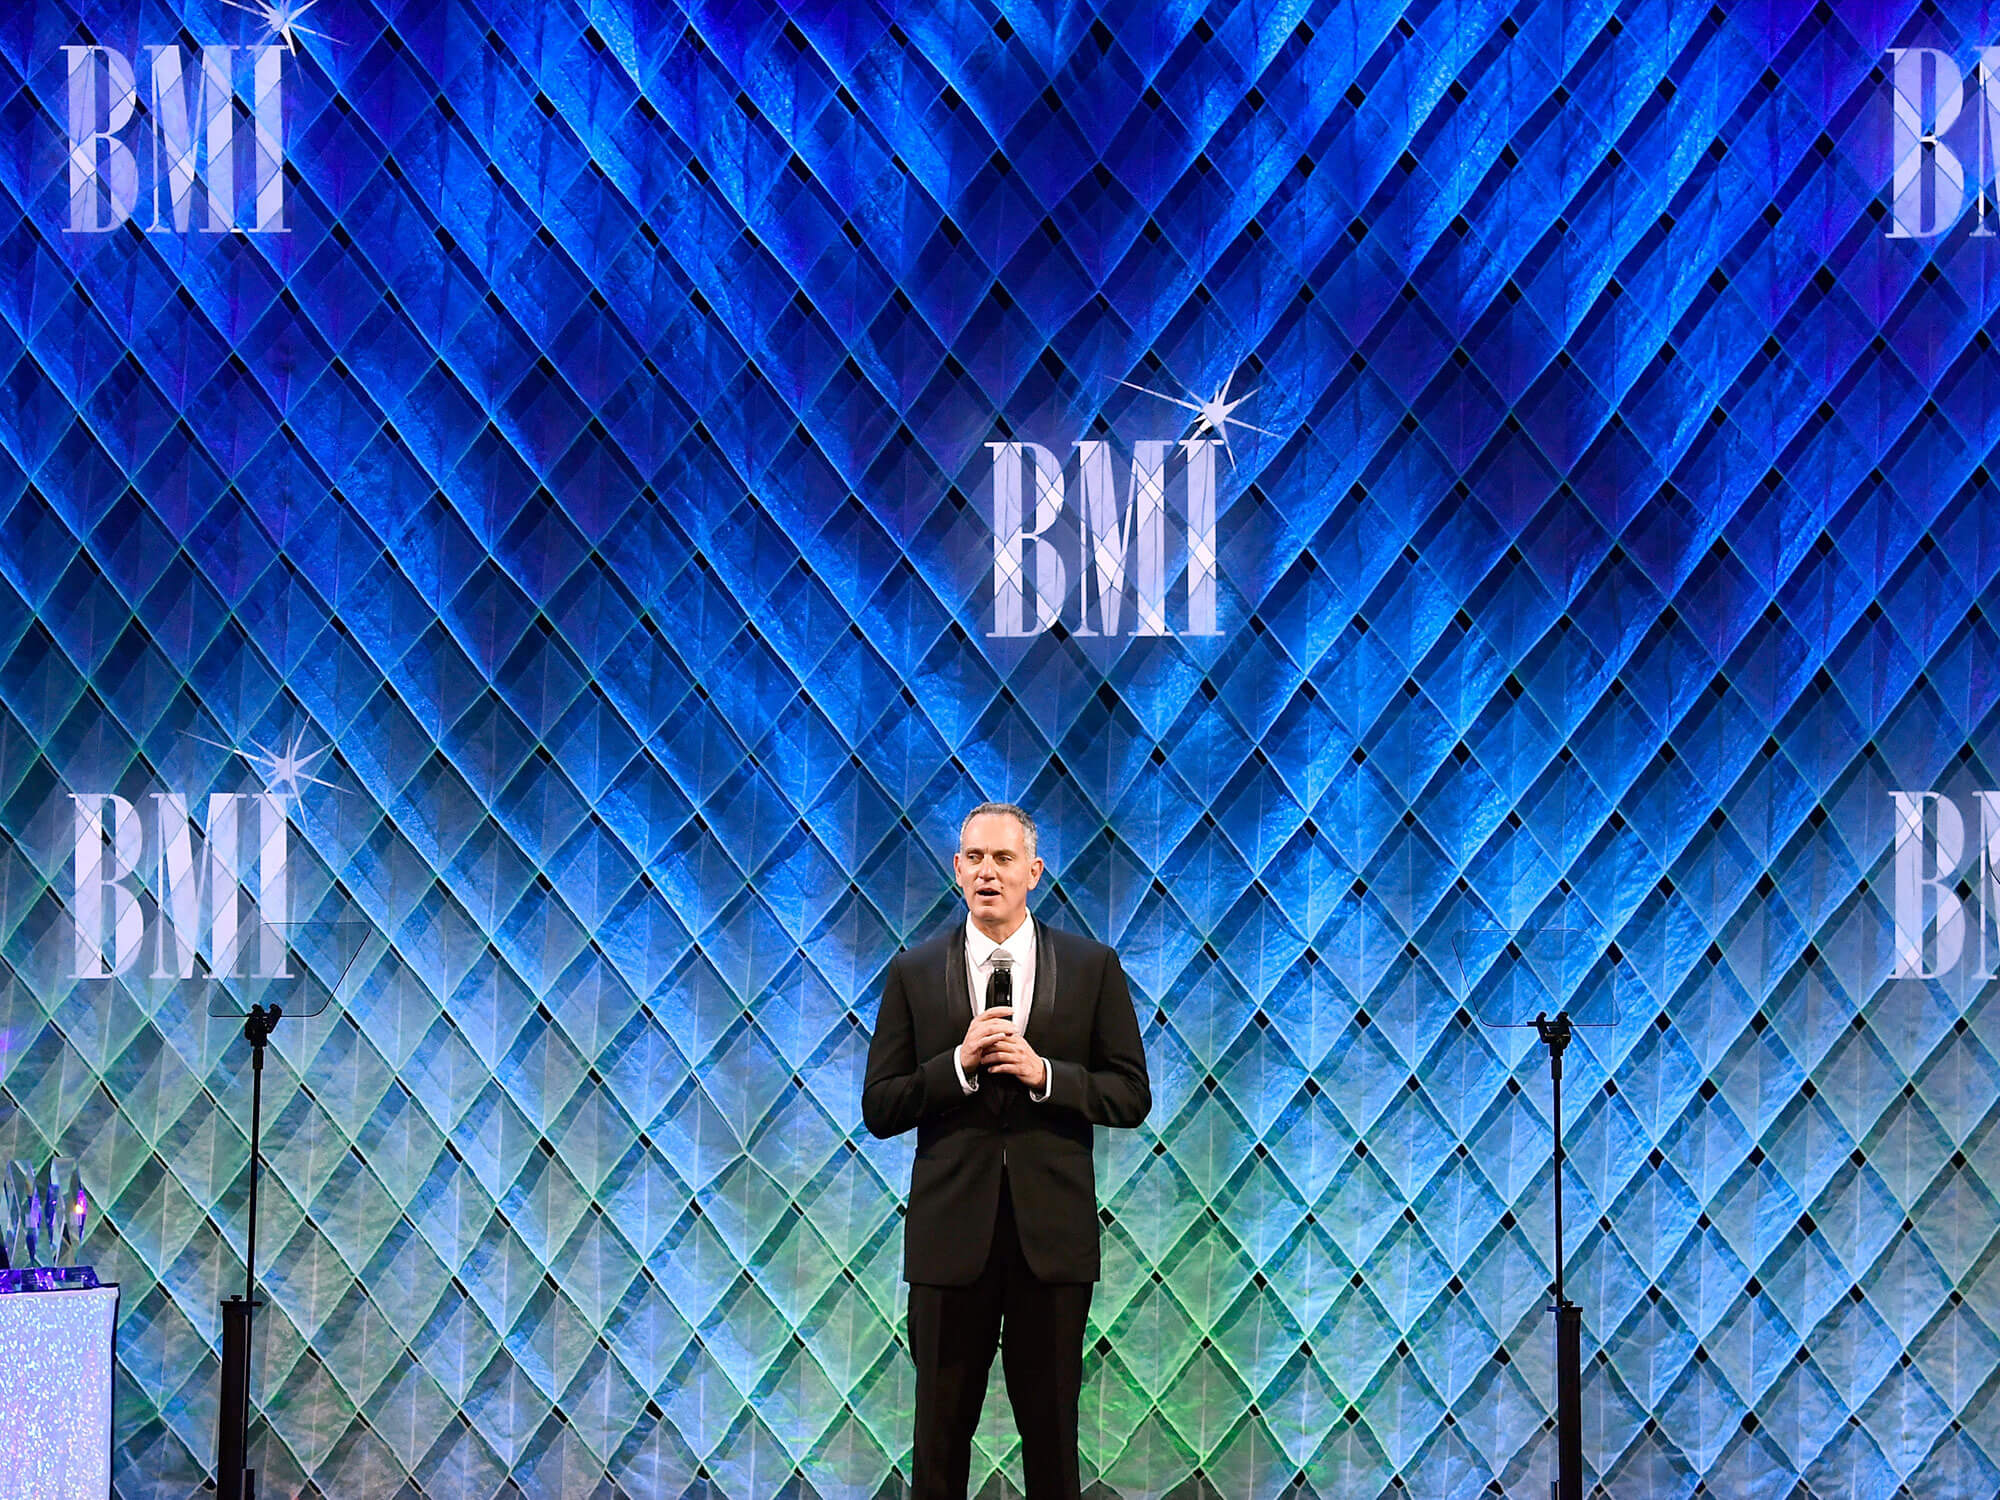 BMI President & CEO Mike O'Neill speaks onstage during the 2017 Broadcast Music, Inc (BMI) Film, TV & Visual Media Awards at the Beverly Wilshire Hotel on May 10, 2017 in Beverly Hills, California.